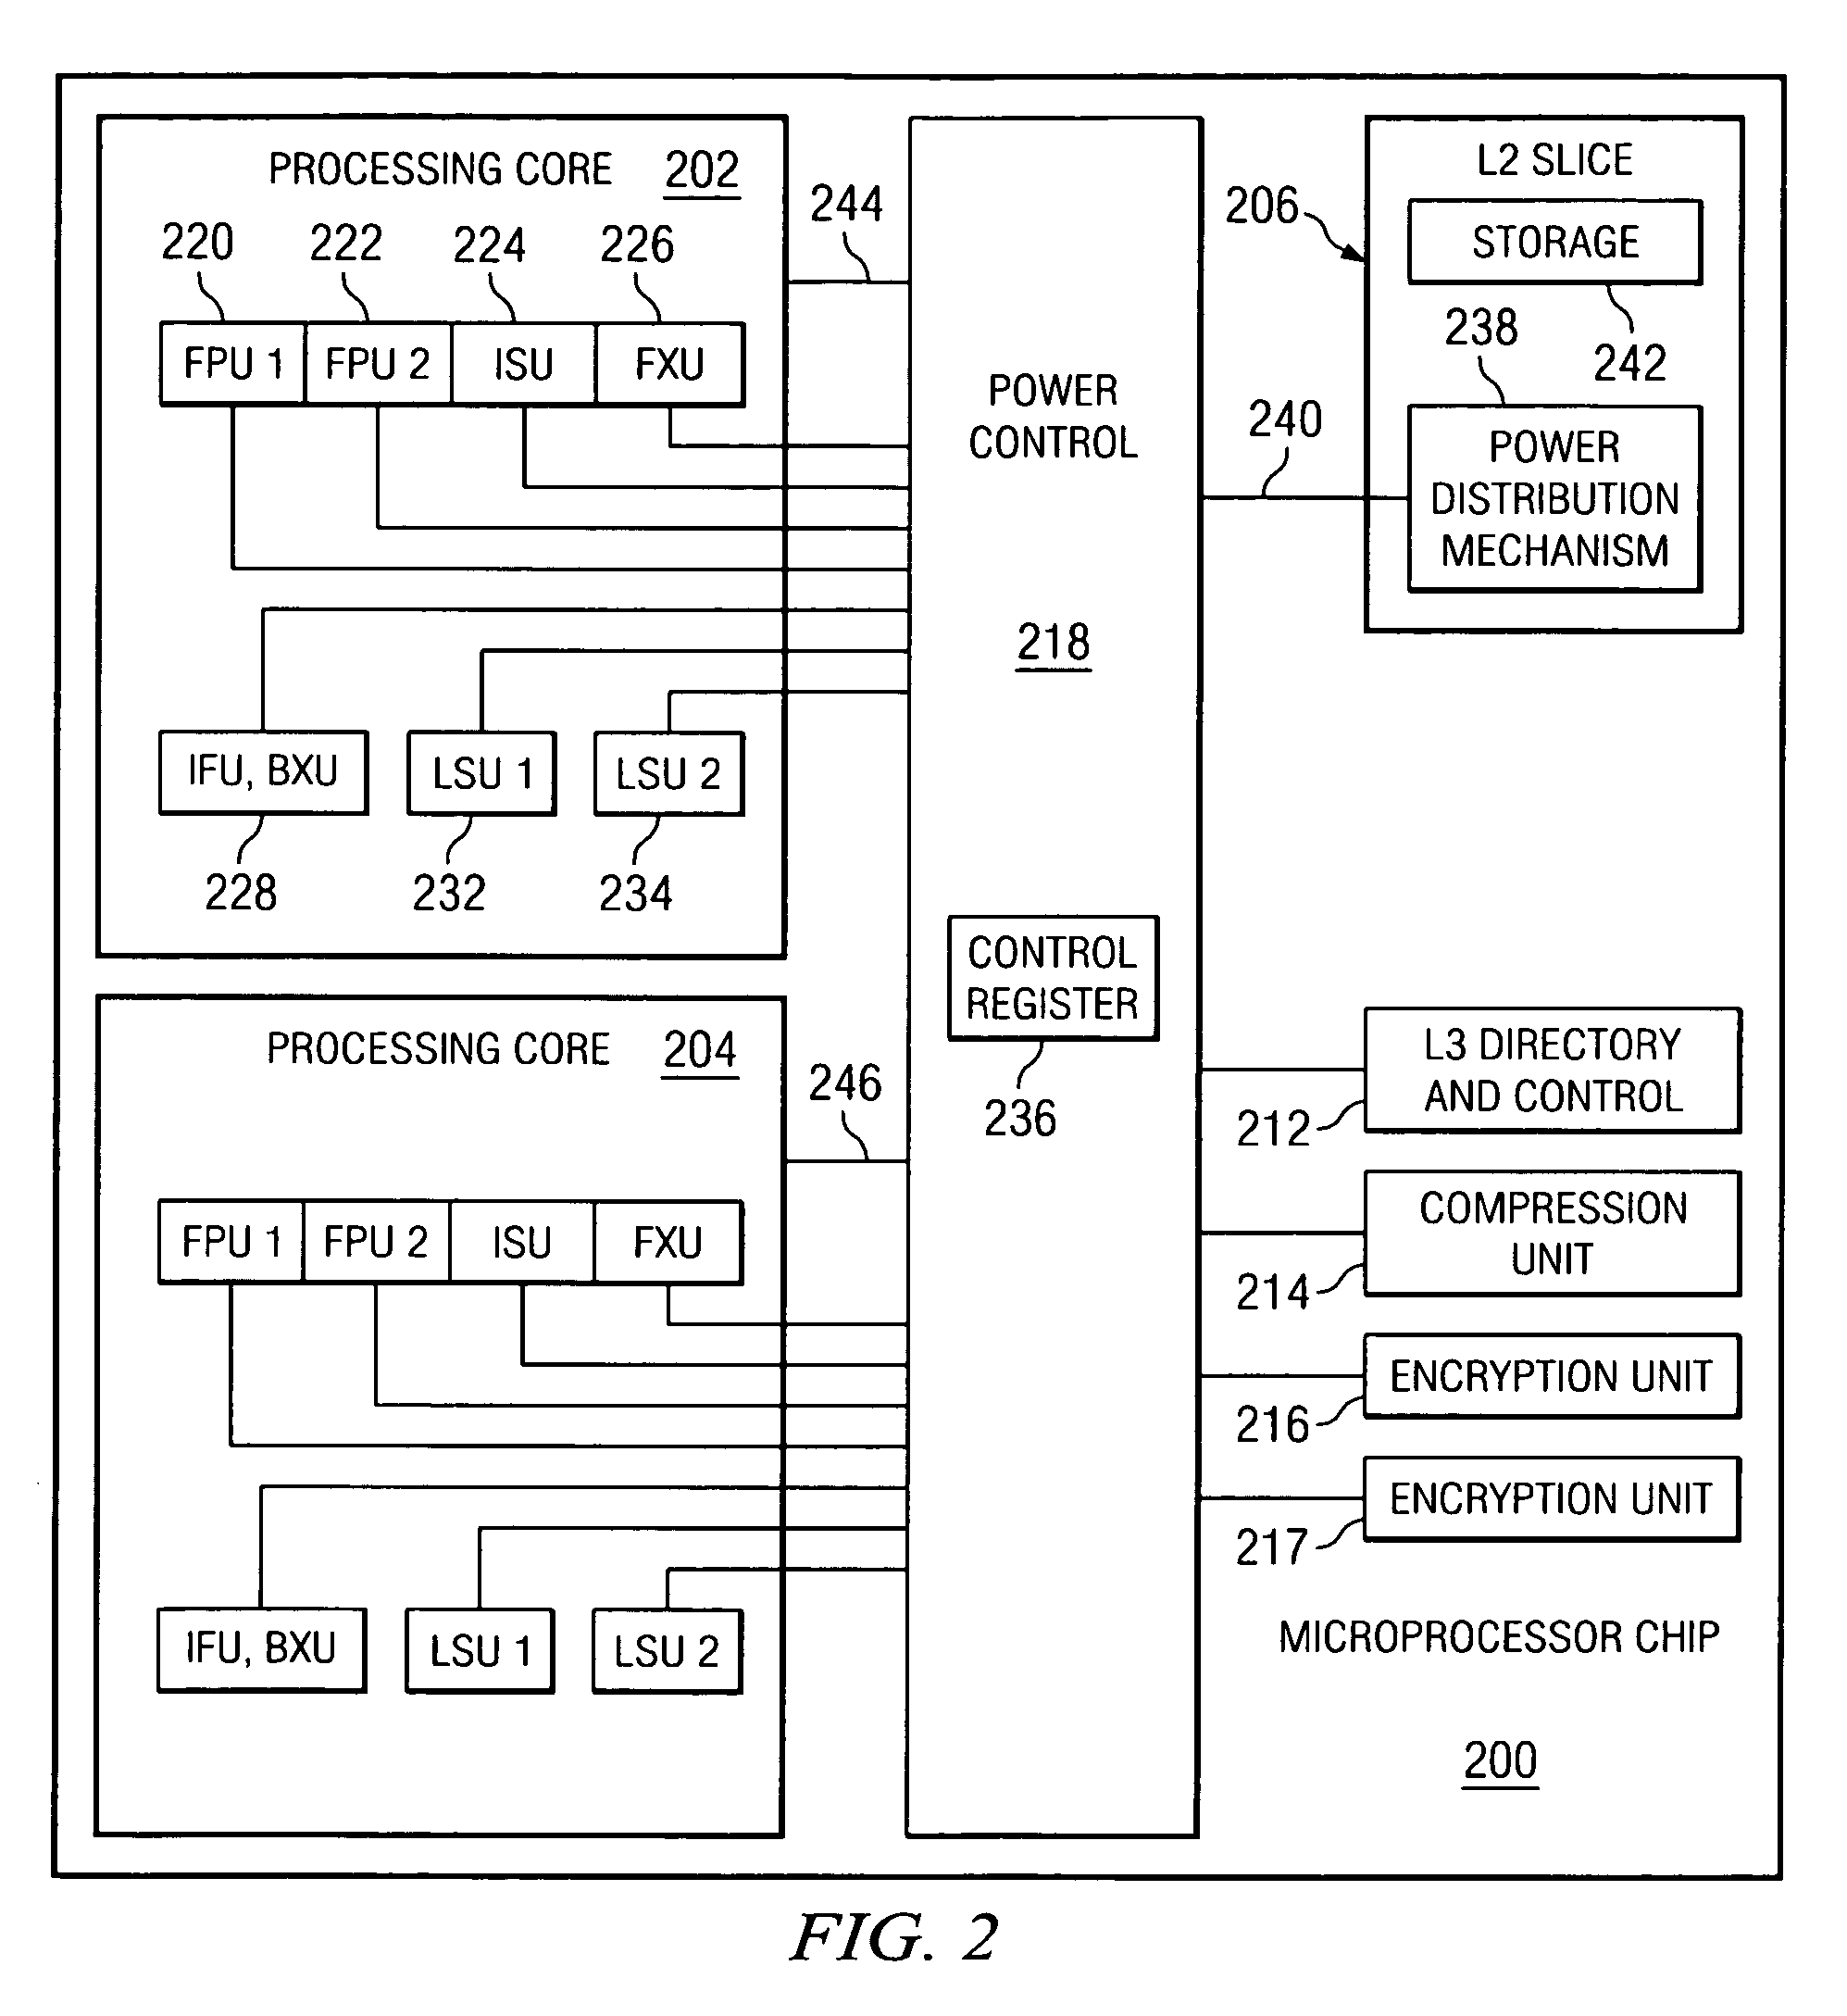 Method, system, and computer program product for dynamically managing power in microprocessor chips according to present processing demands